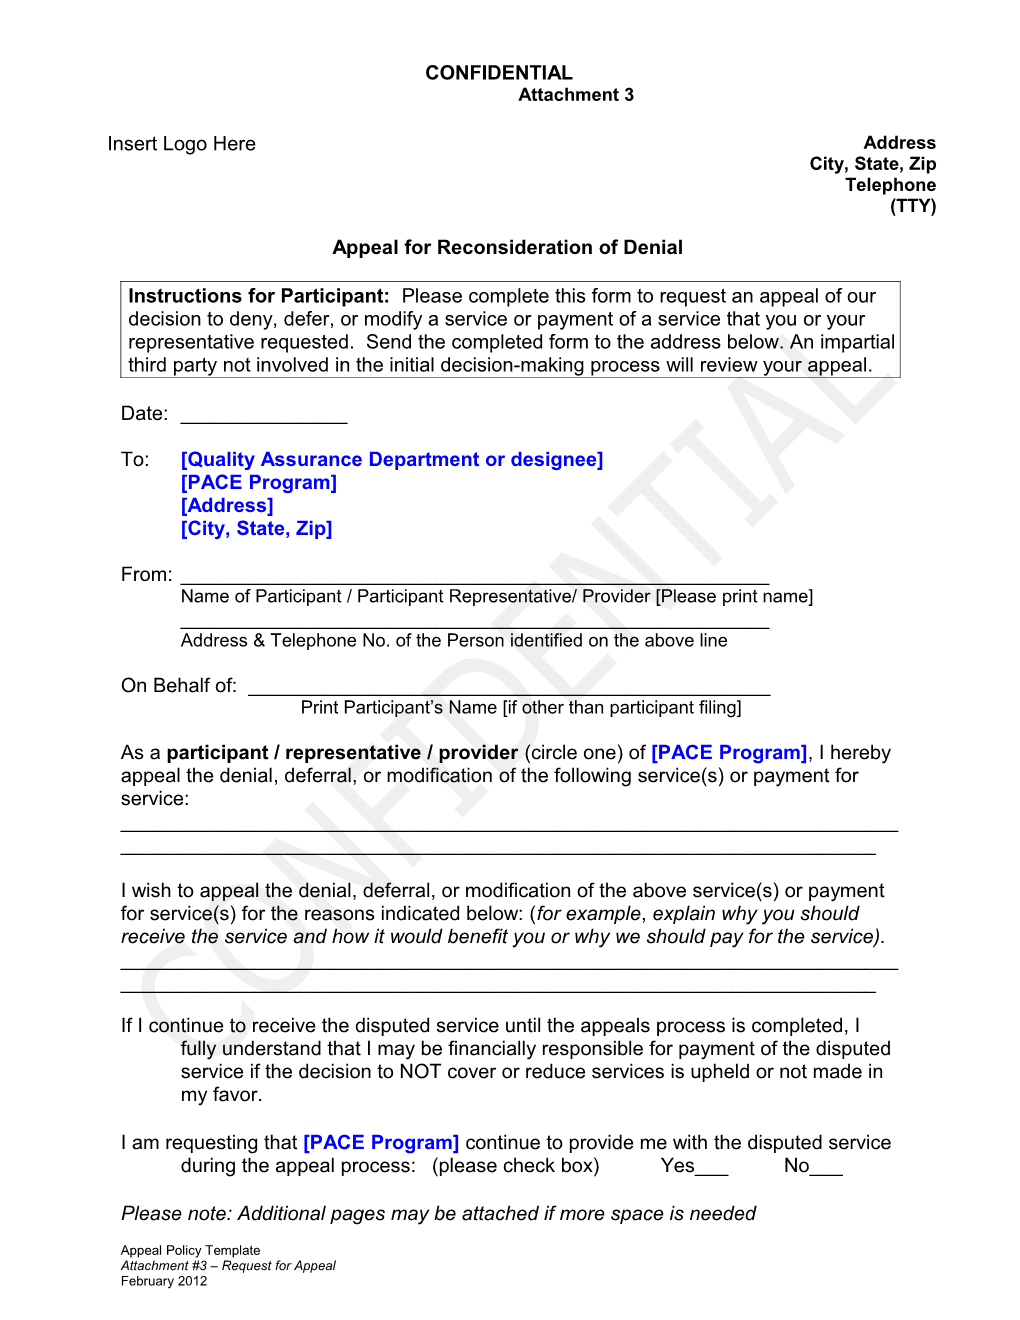 Attachment 3 - Request for Appeal of Denied Service